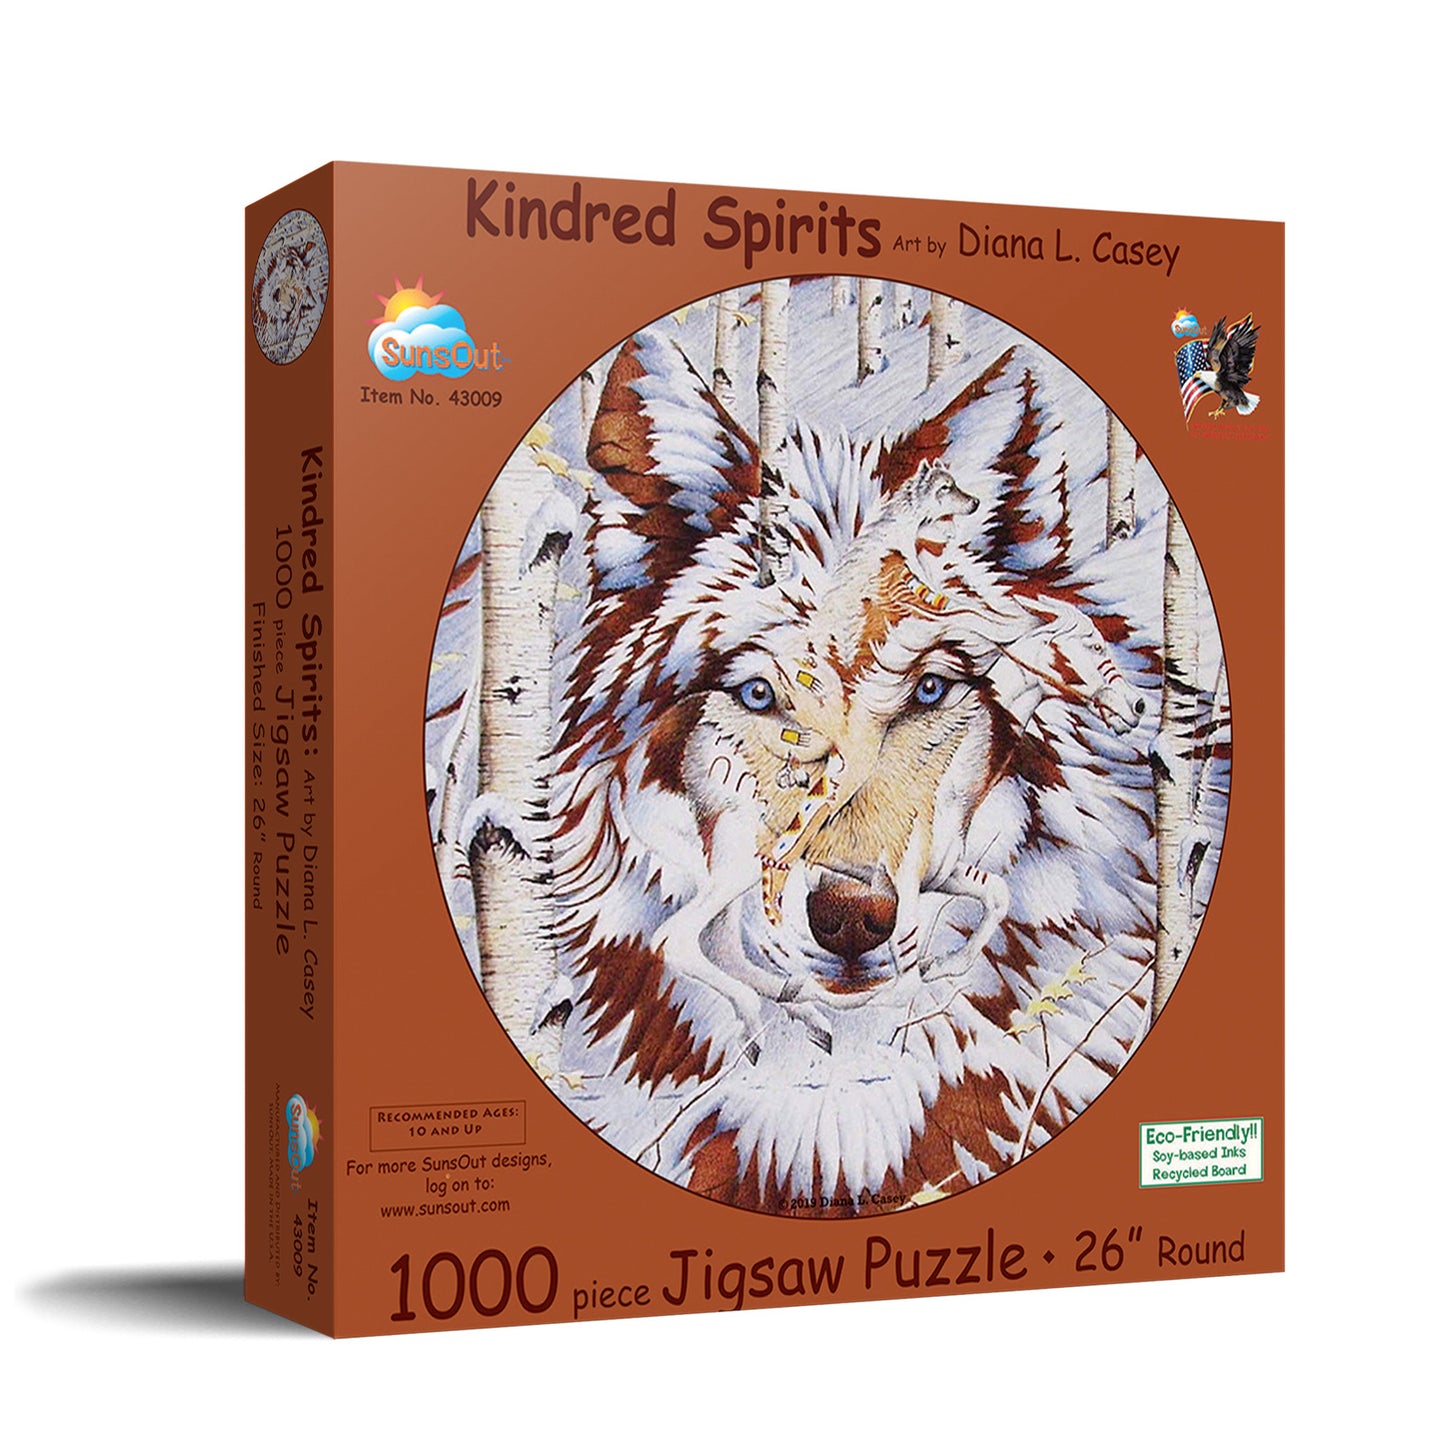 Kindred Spirits 1000 - 1000 Piece Jigsaw Puzzle